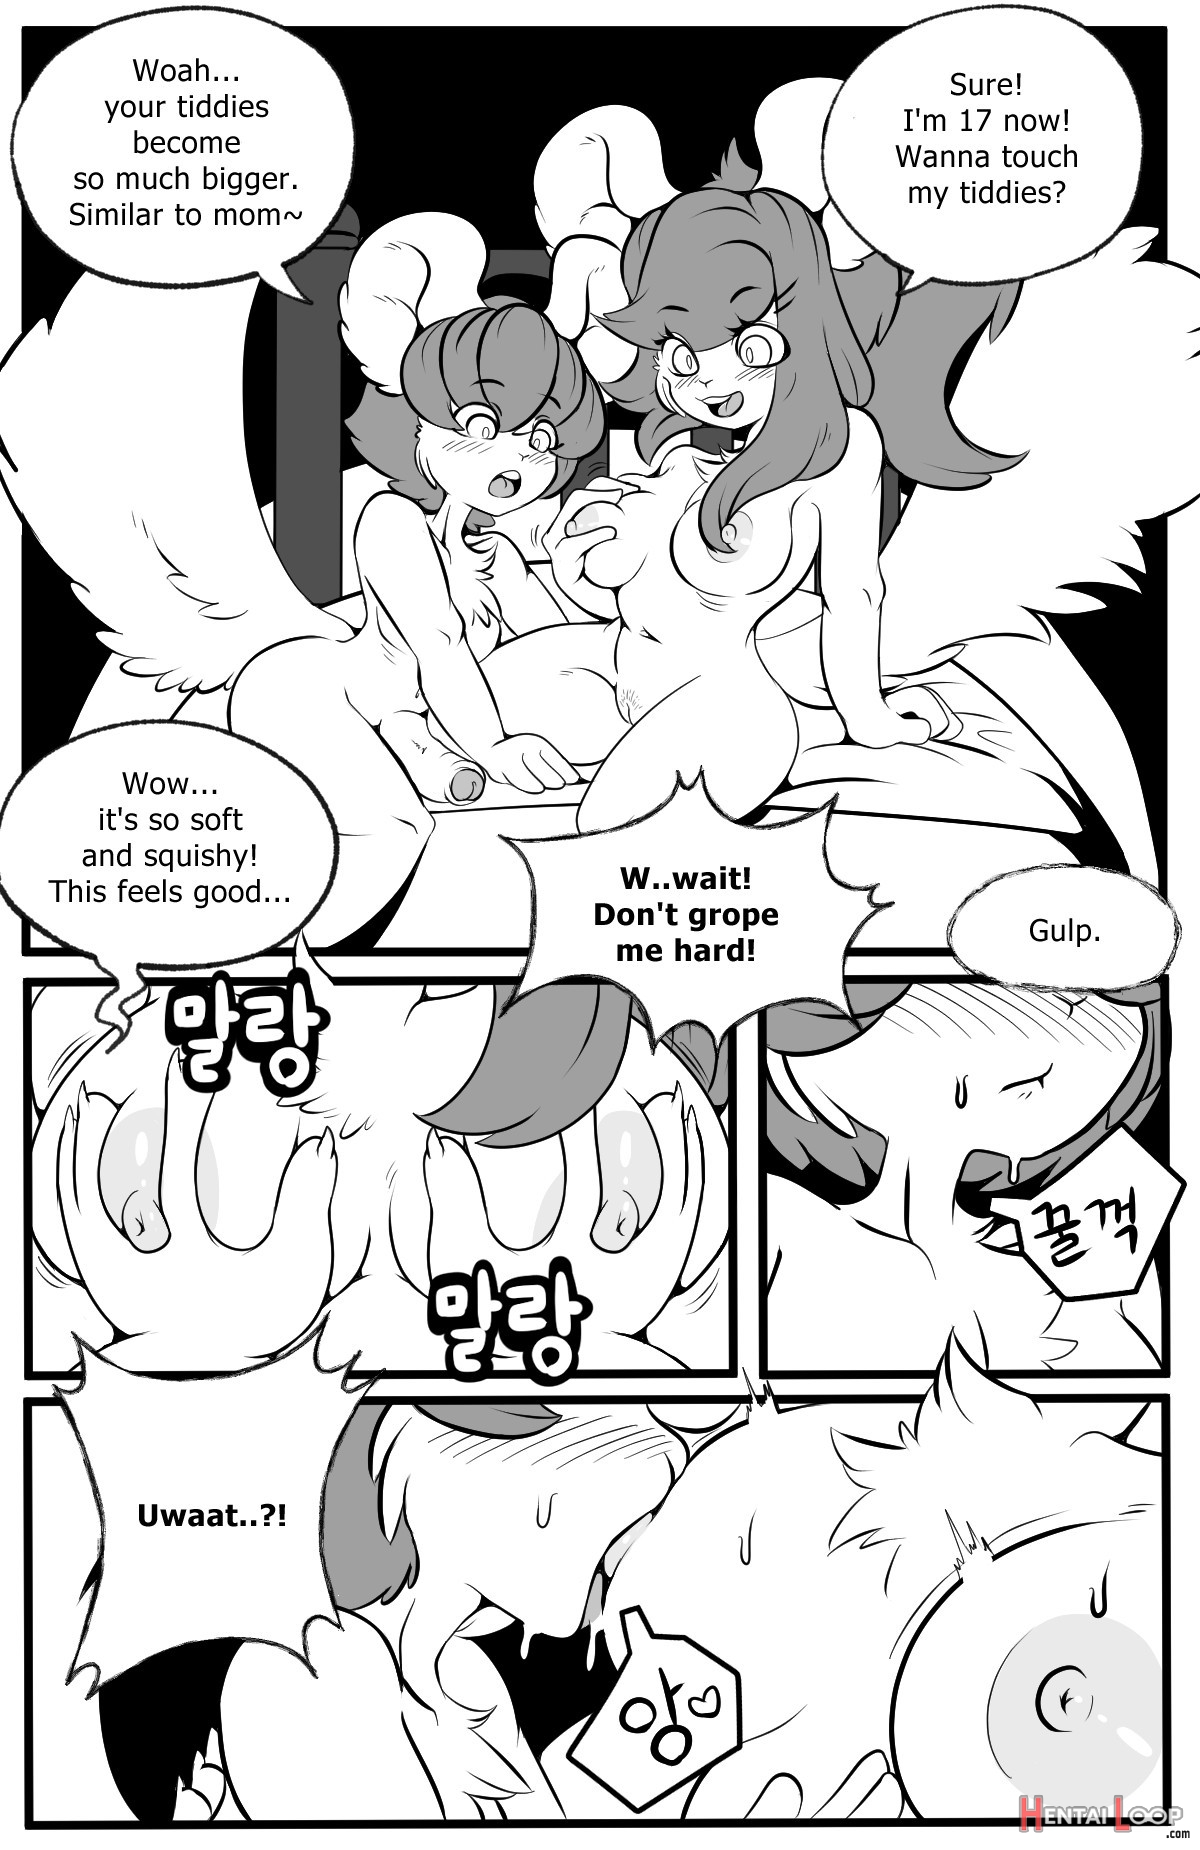 Playing Like Adult With Sister page 7